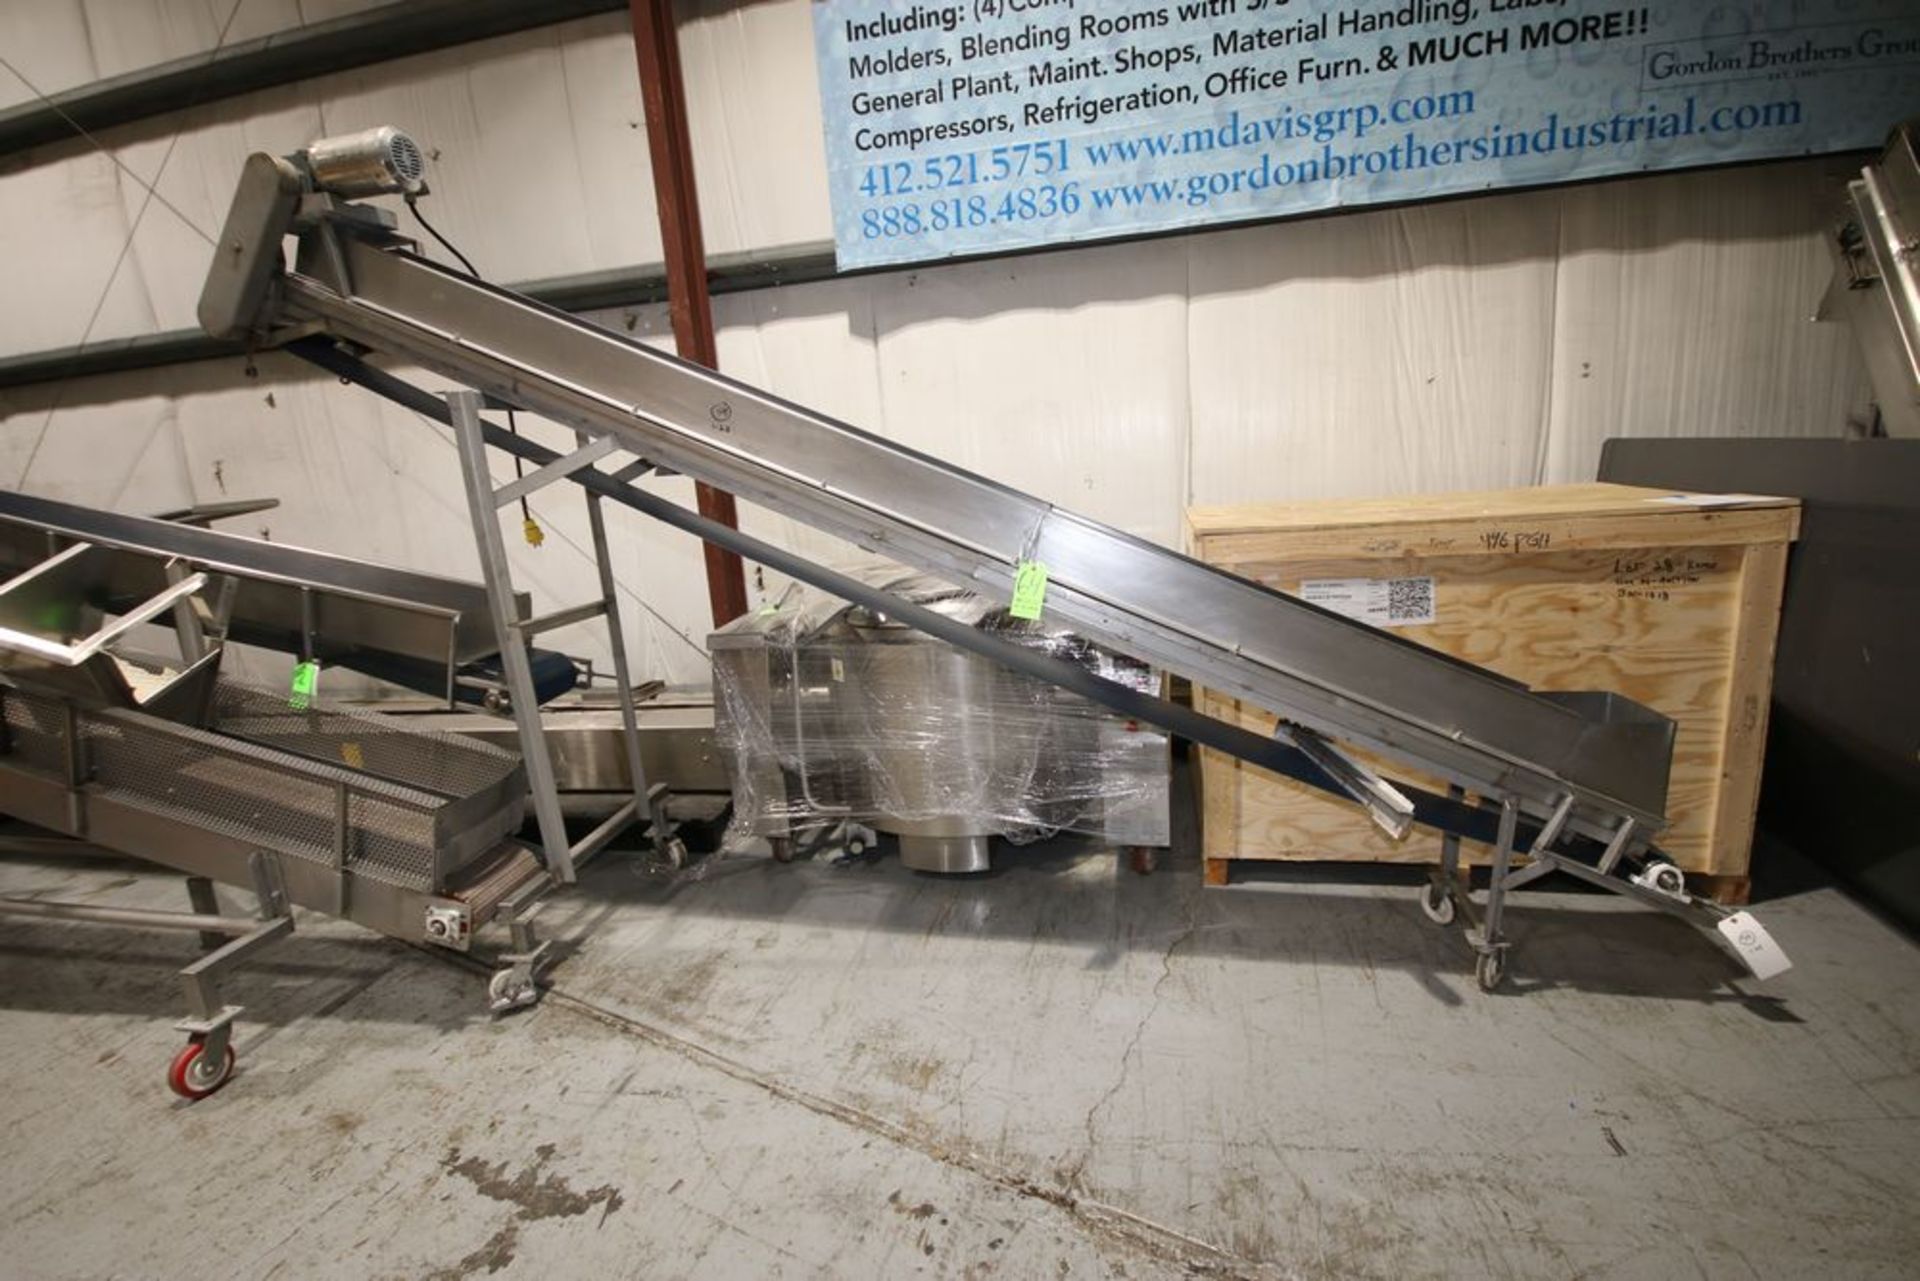 S/S Incline Conveyor with Cleated Rubber Belt, Cleat Spacing: Aprox. 11-1/2", with S/S Clad Motor, - Image 2 of 4